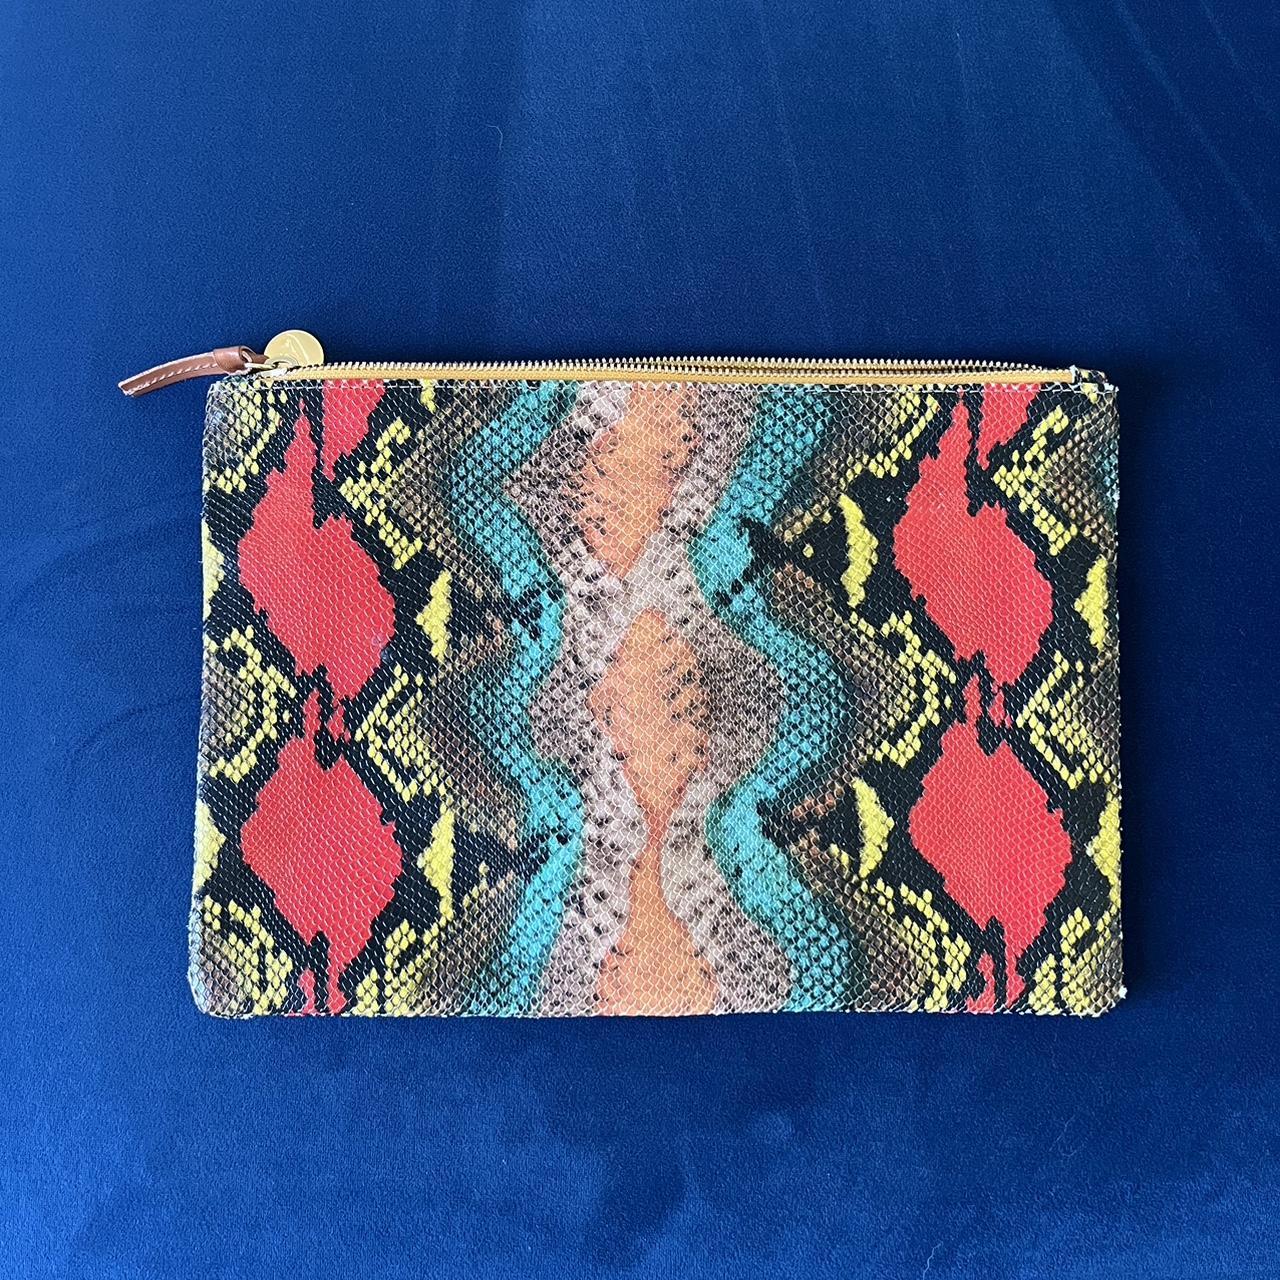 authentic gold distressed clutch labelled CLARE - Depop